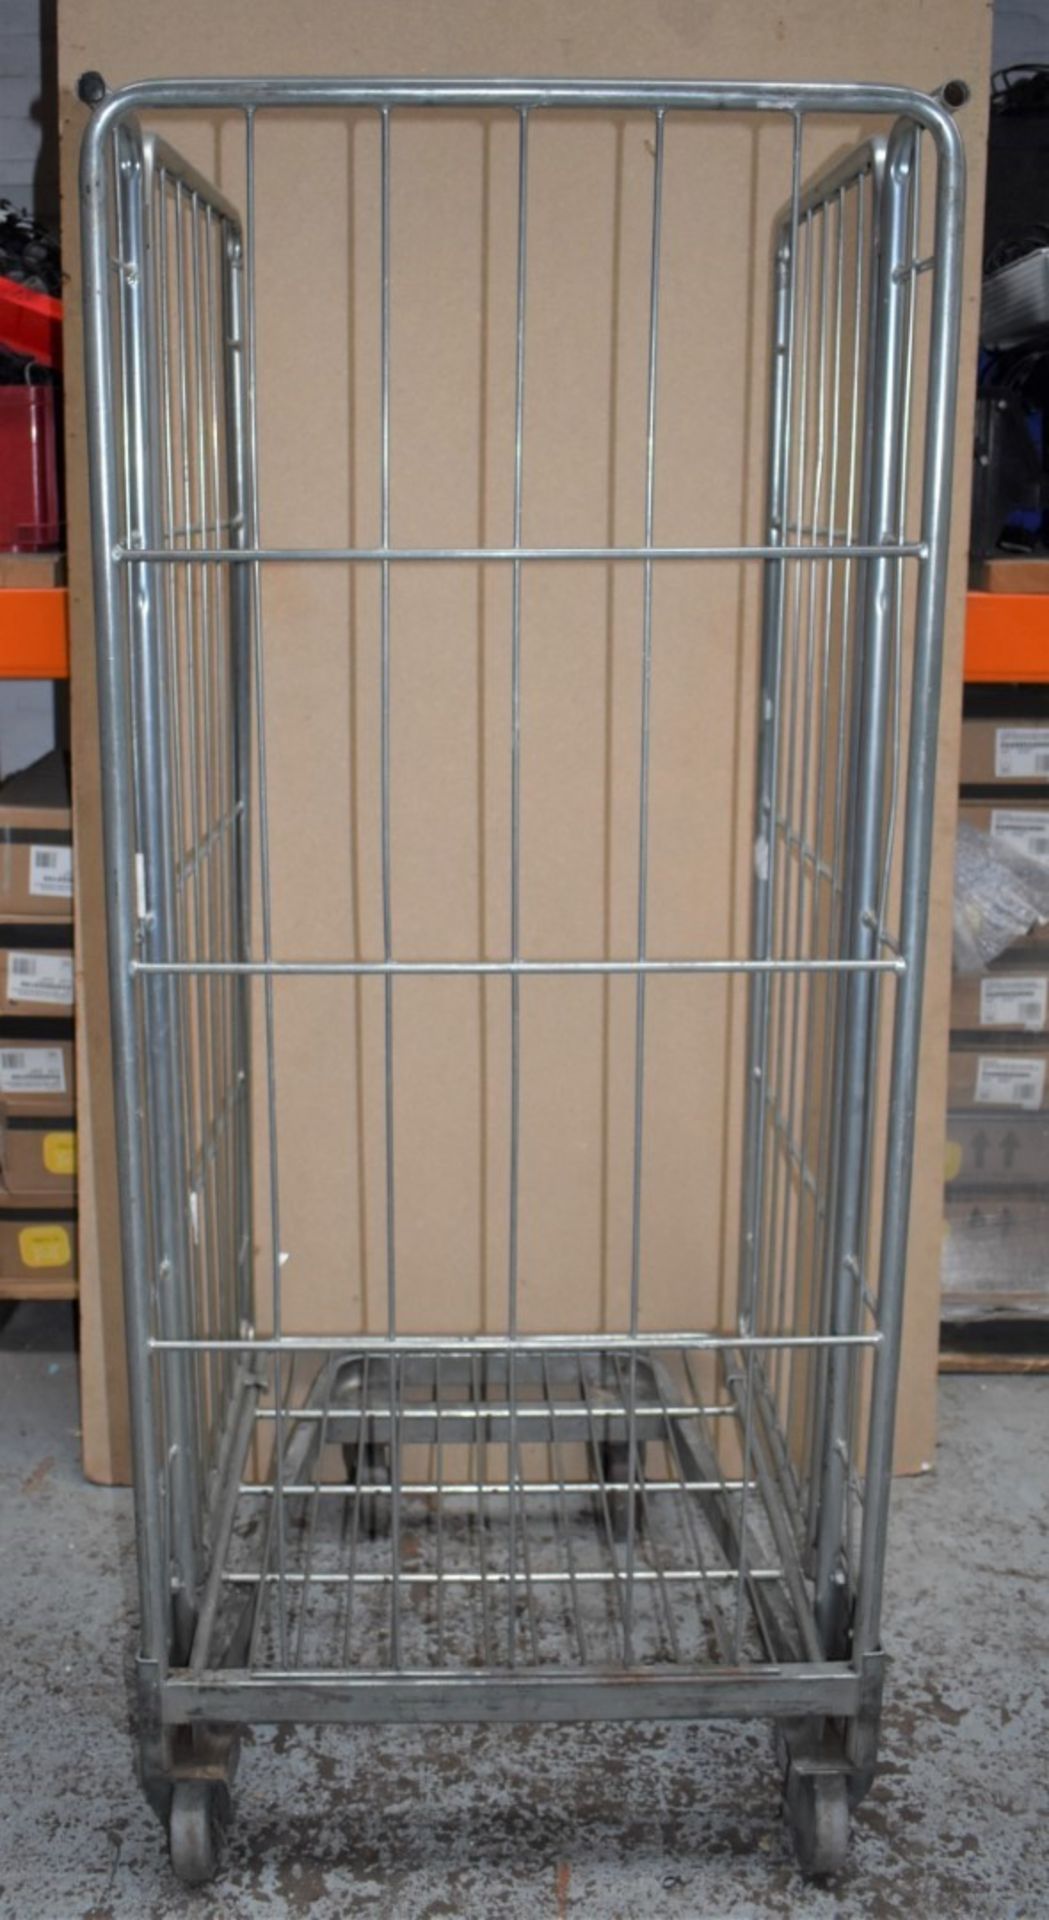 1 x Roller Cage With Heavy Duty Castors - Demountable With Three Sides - Ideal For Storing and - Image 9 of 9